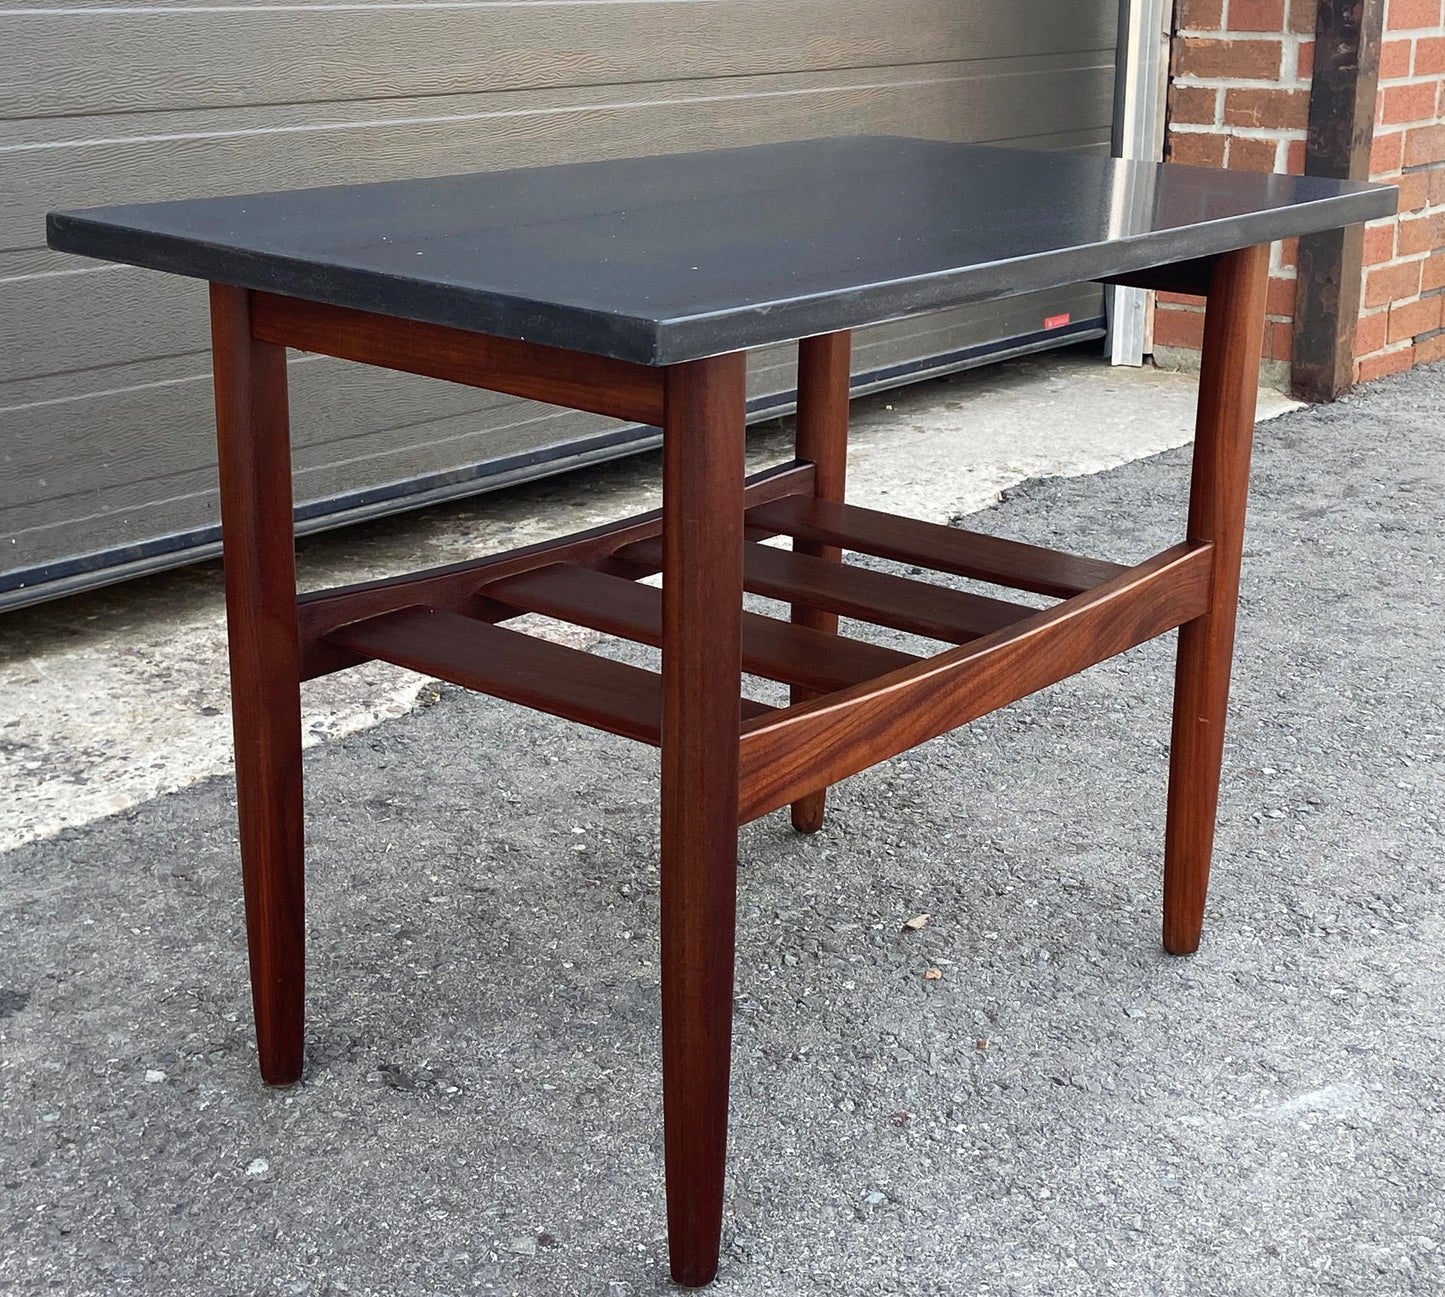 REFINISHED Mid Century Modern Solid Teak Accent Table w Shelf & Stone Top